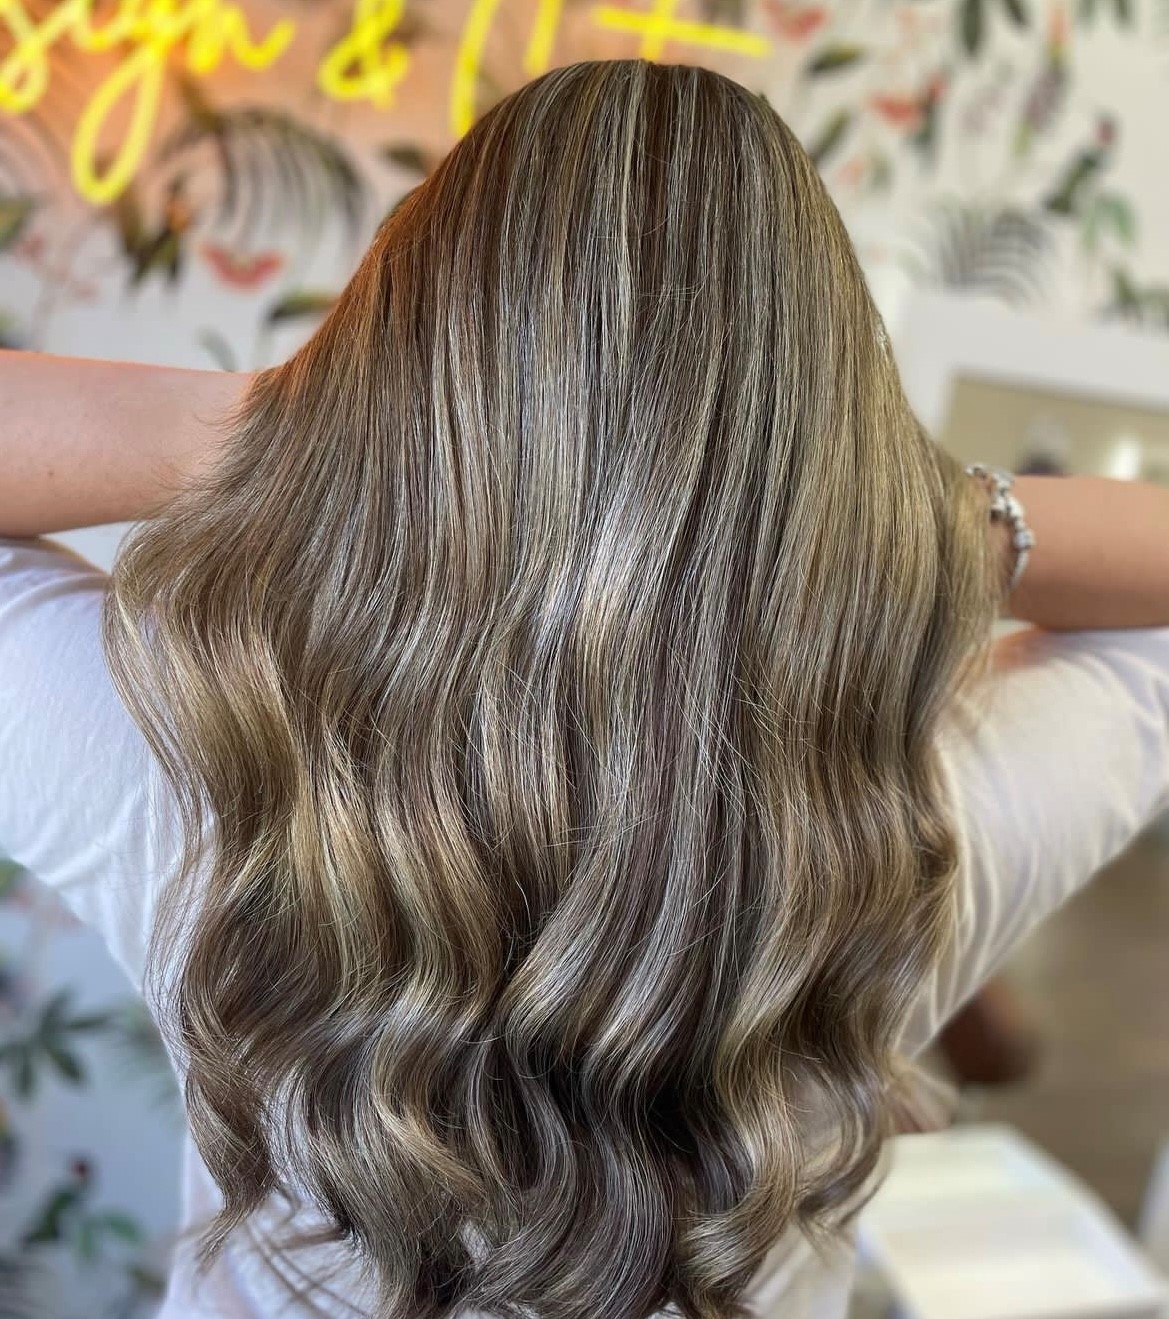 Full head highlights and curls 